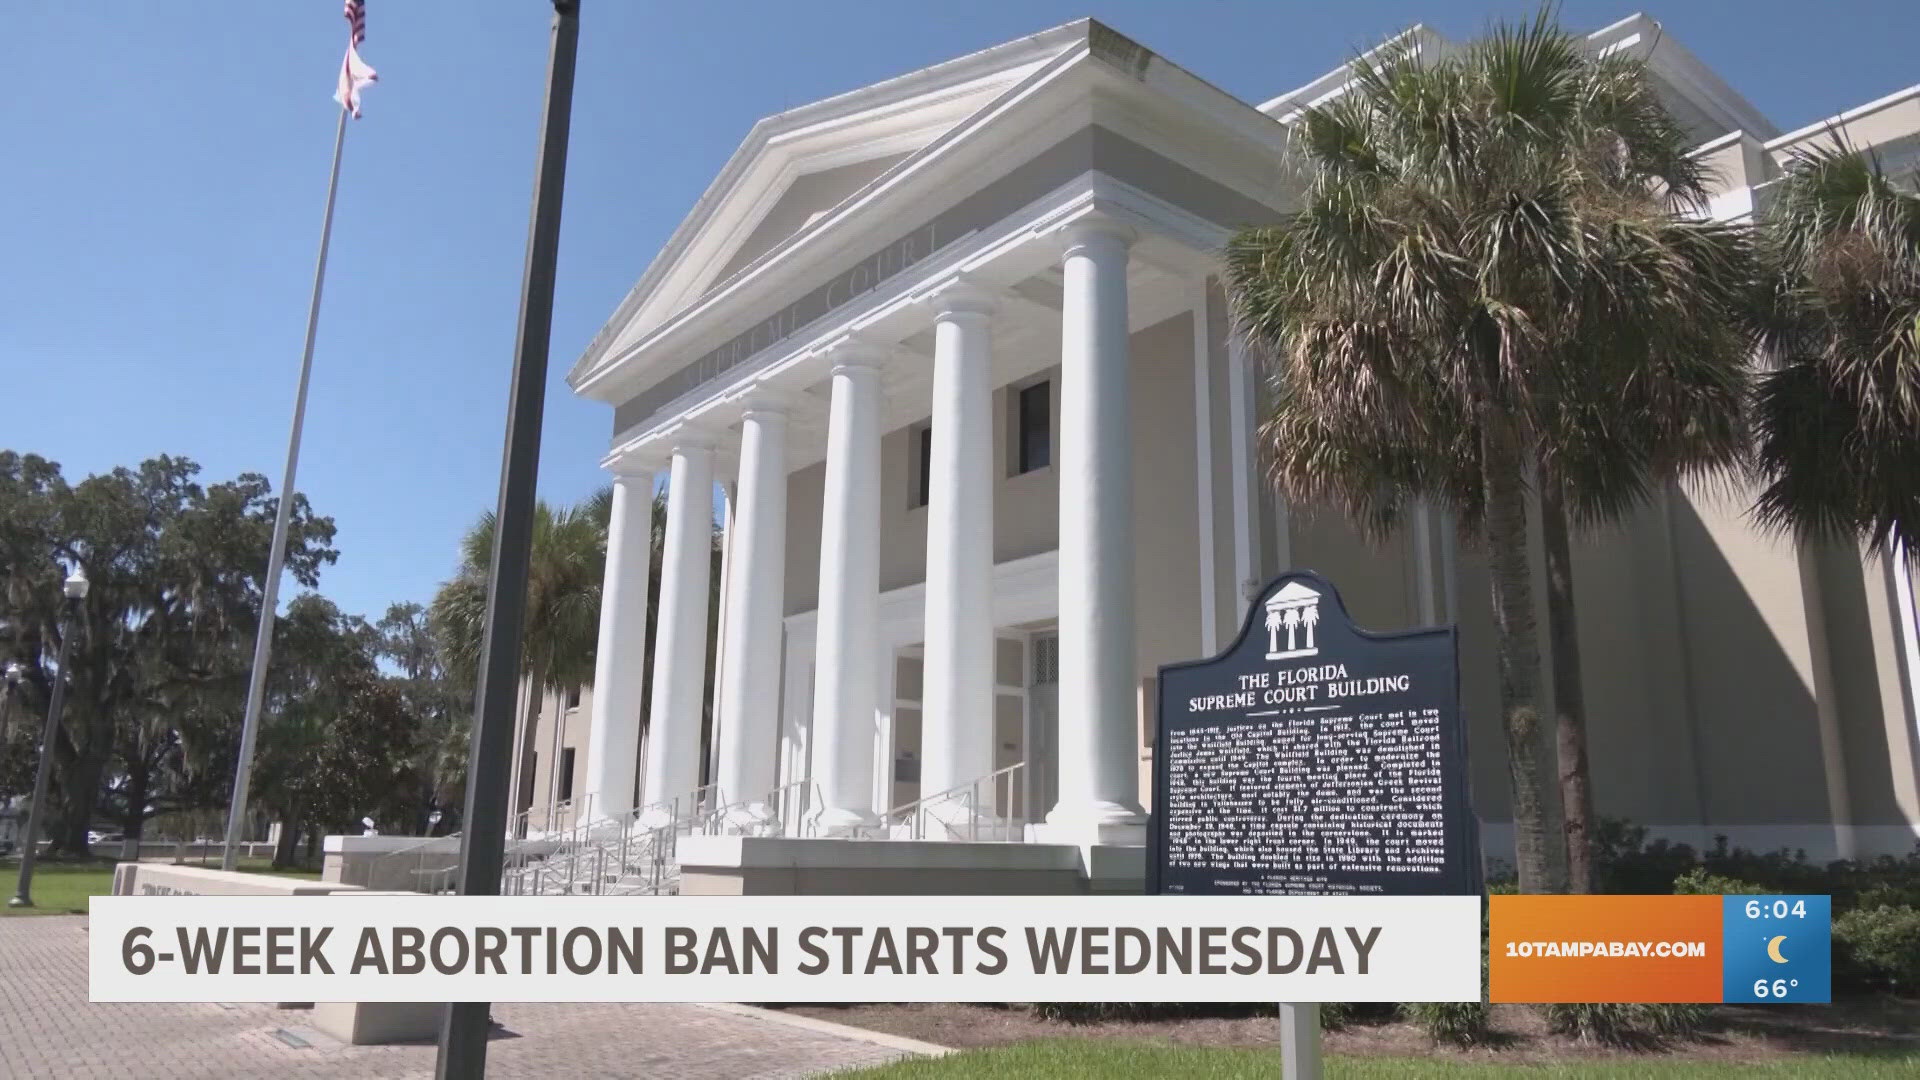 The law is going into effect after the Florida Supreme Court upheld the state's 15-week ban, allowing the trigger law to take effect thereafter.